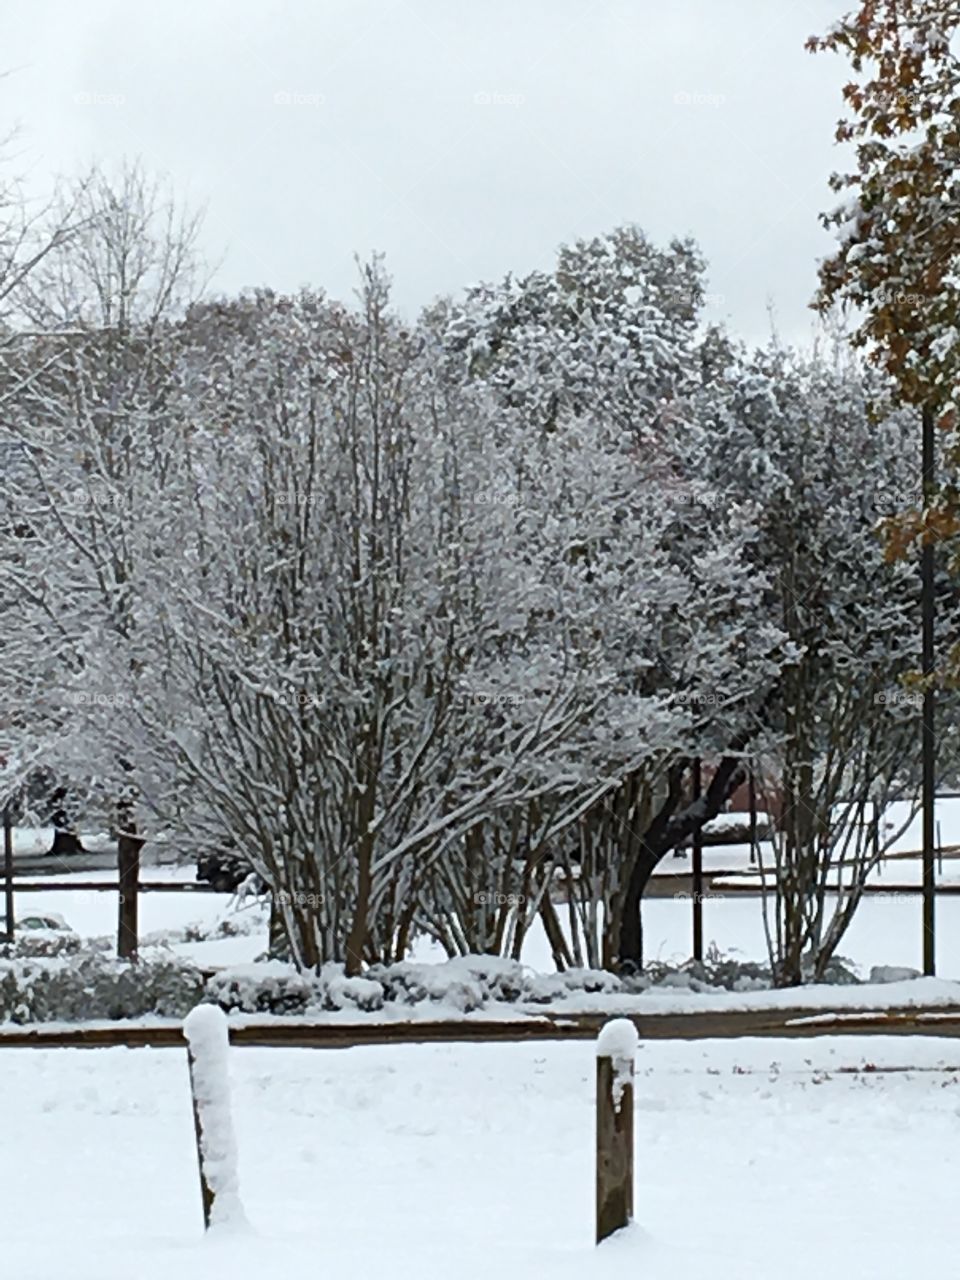 Snow day in Ms 